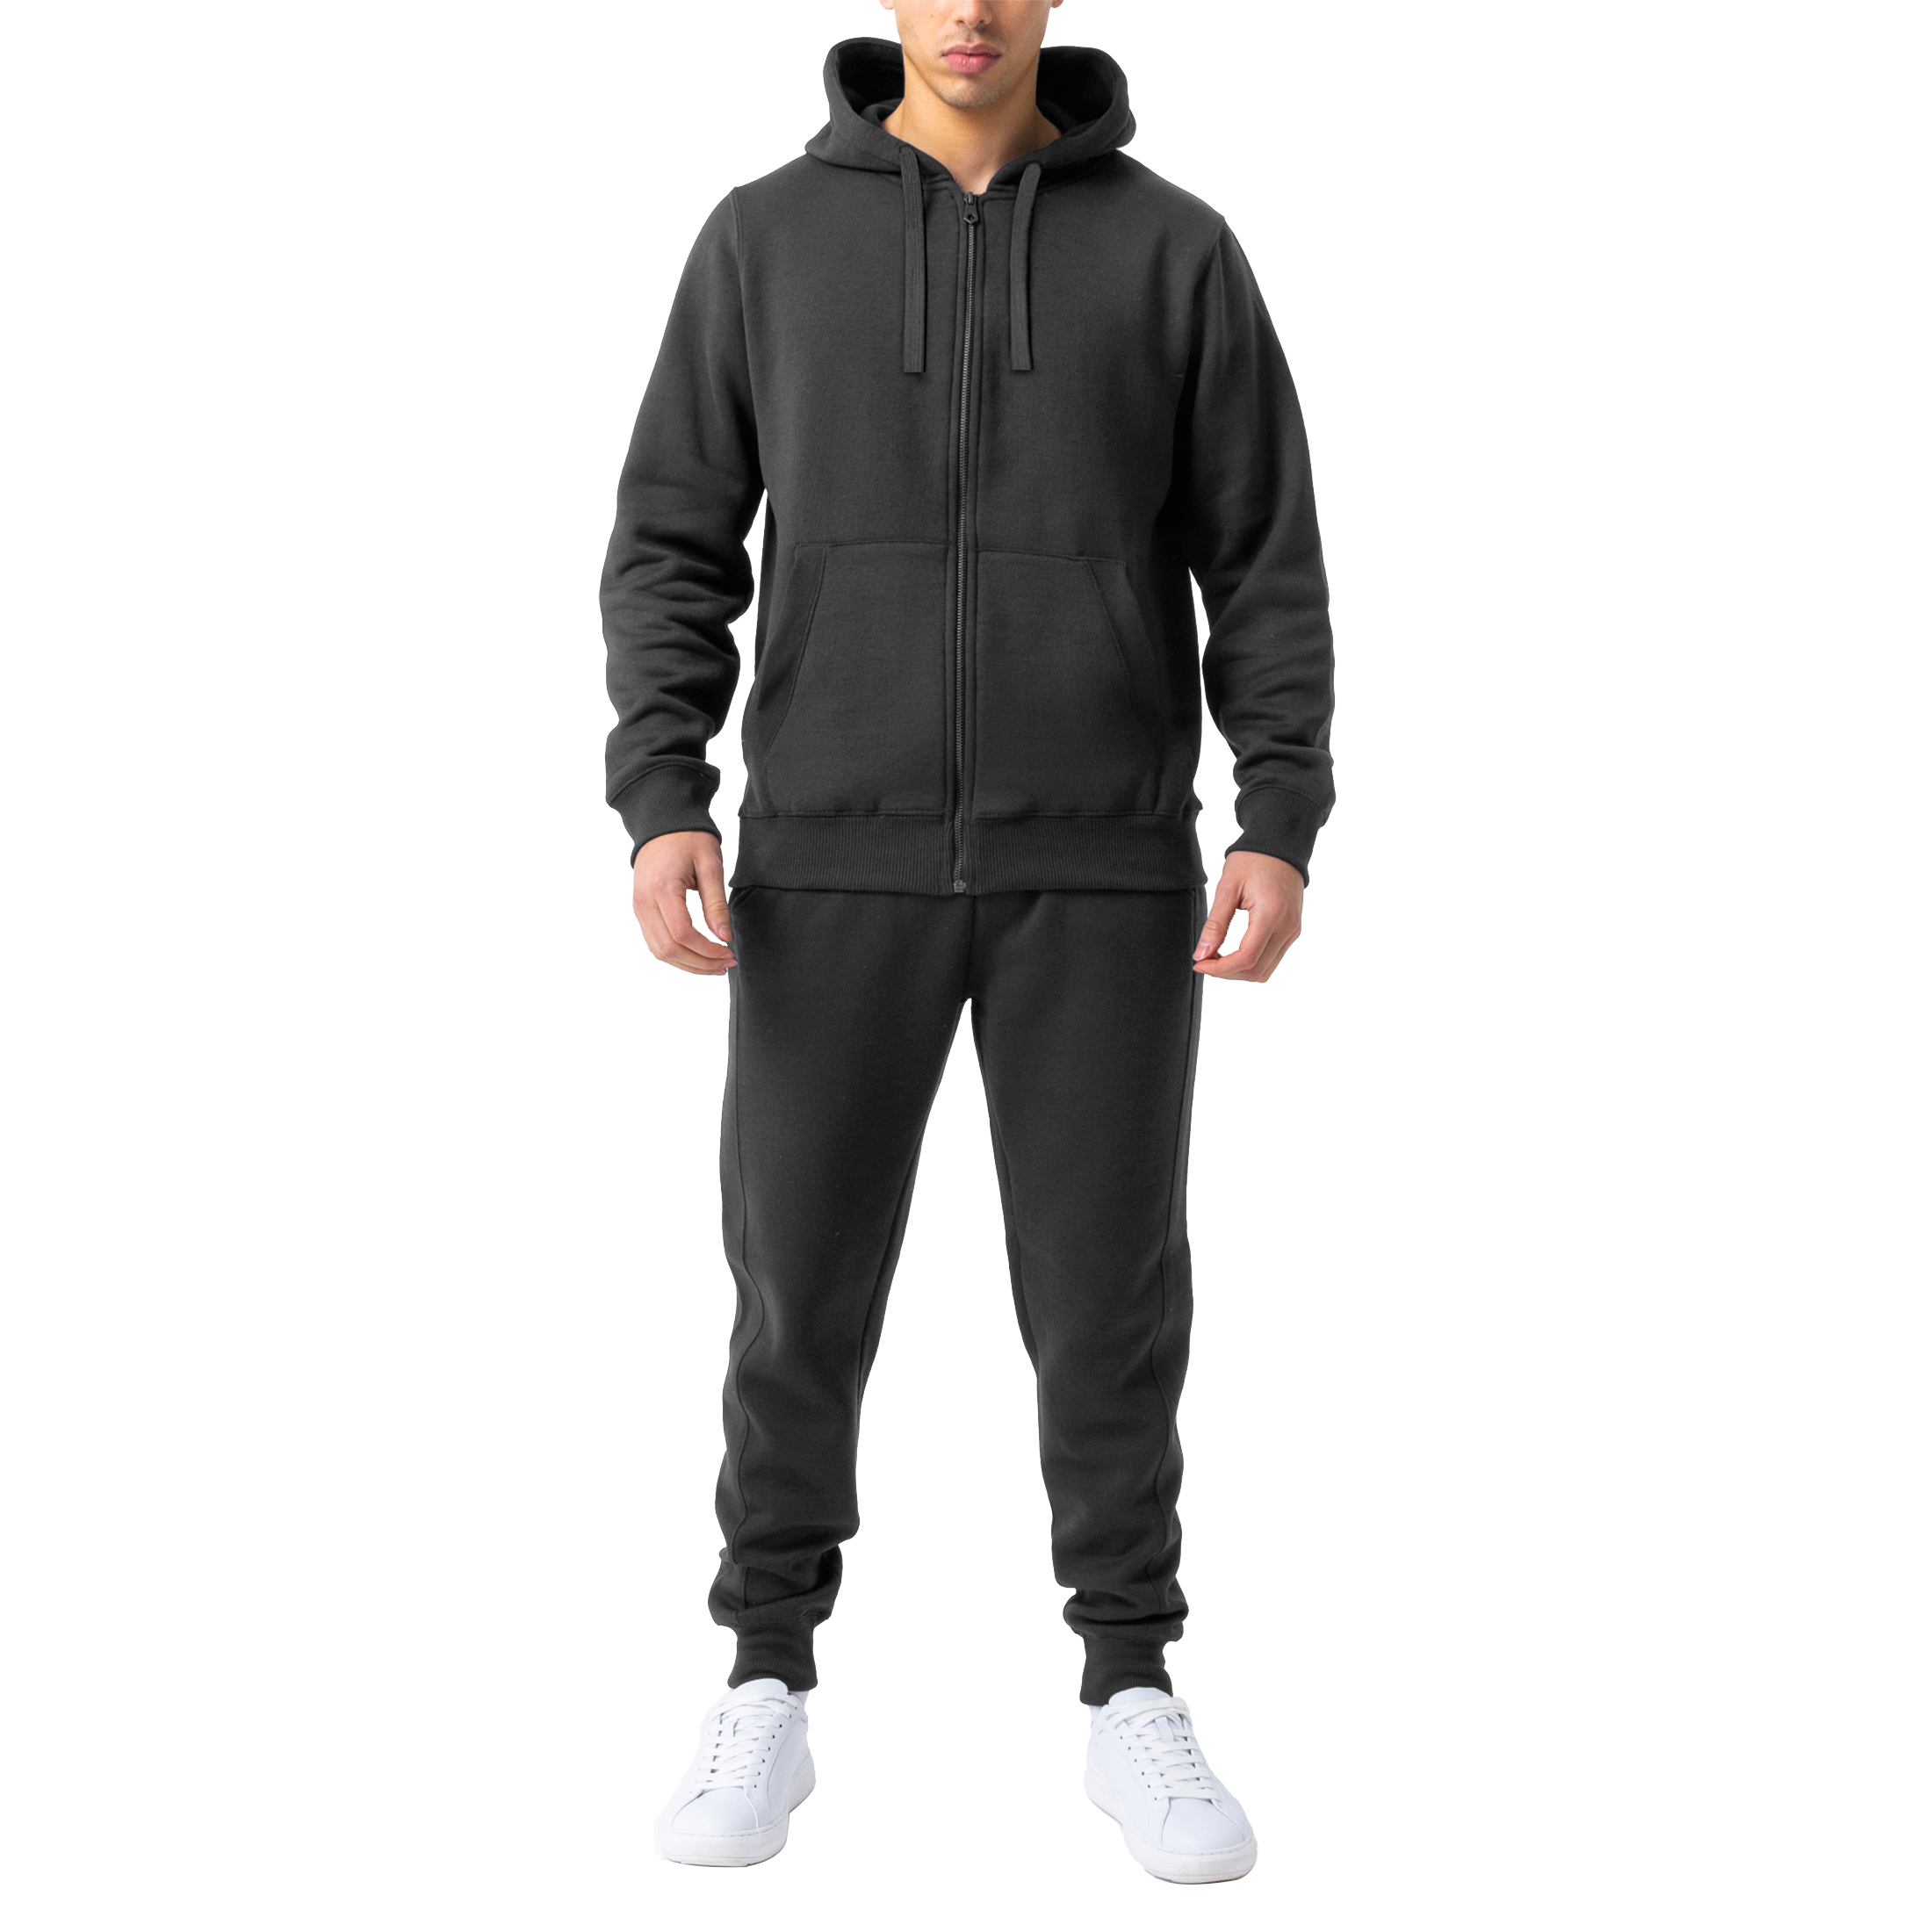 Men's Casual Jogging Athletic Active Full Zip Up Tracksuit - Charcoal, X-Large